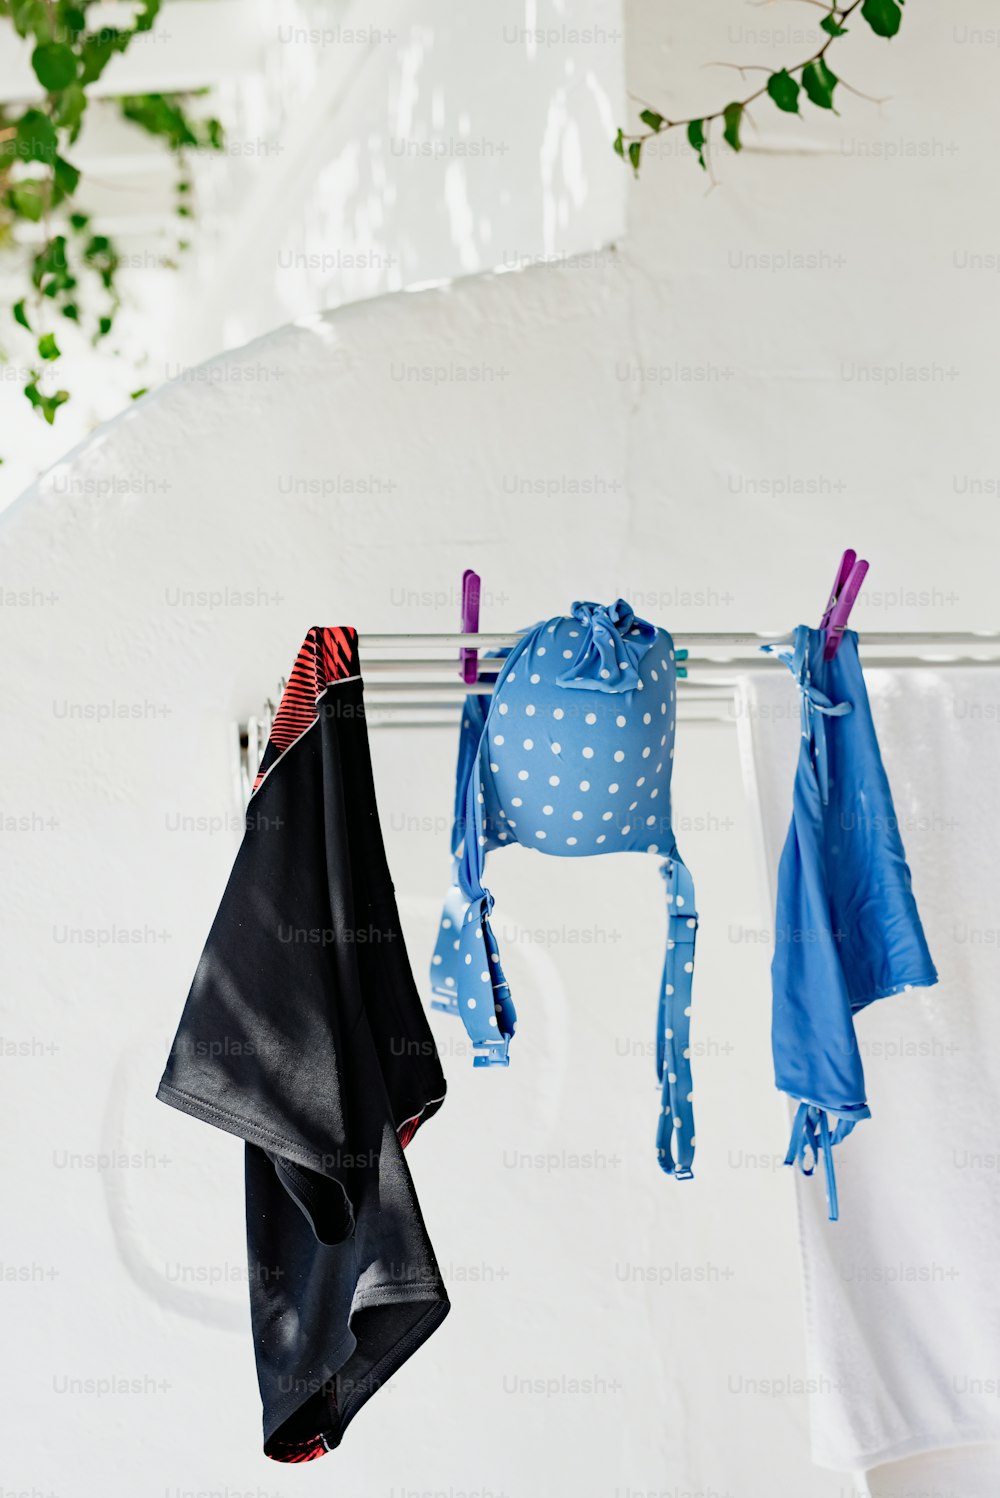 clothes hanging on a clothes line next to a white wall